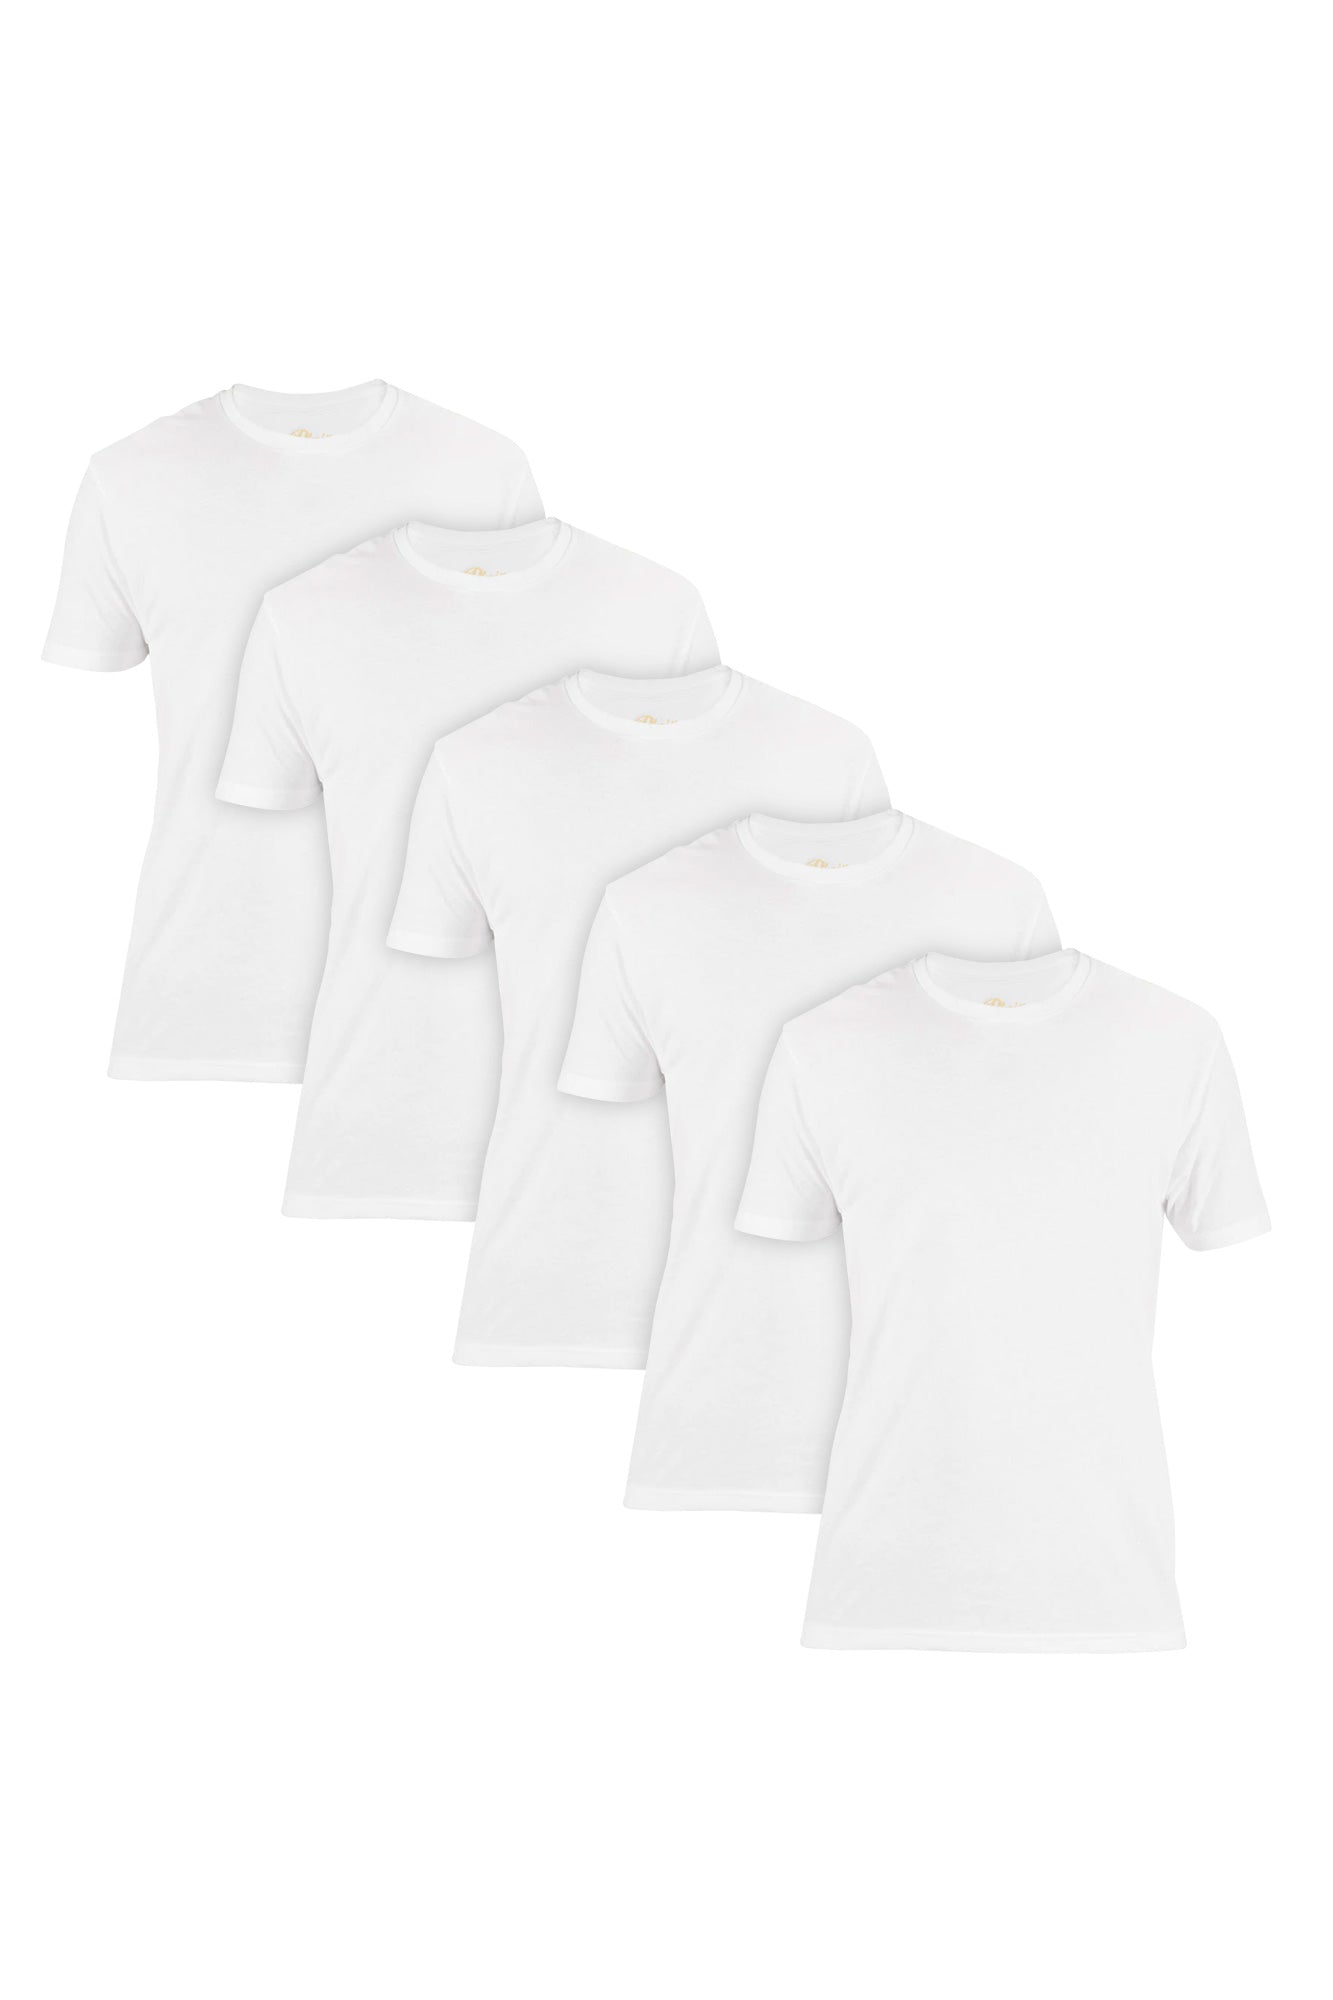 The White Crew 5-Pack